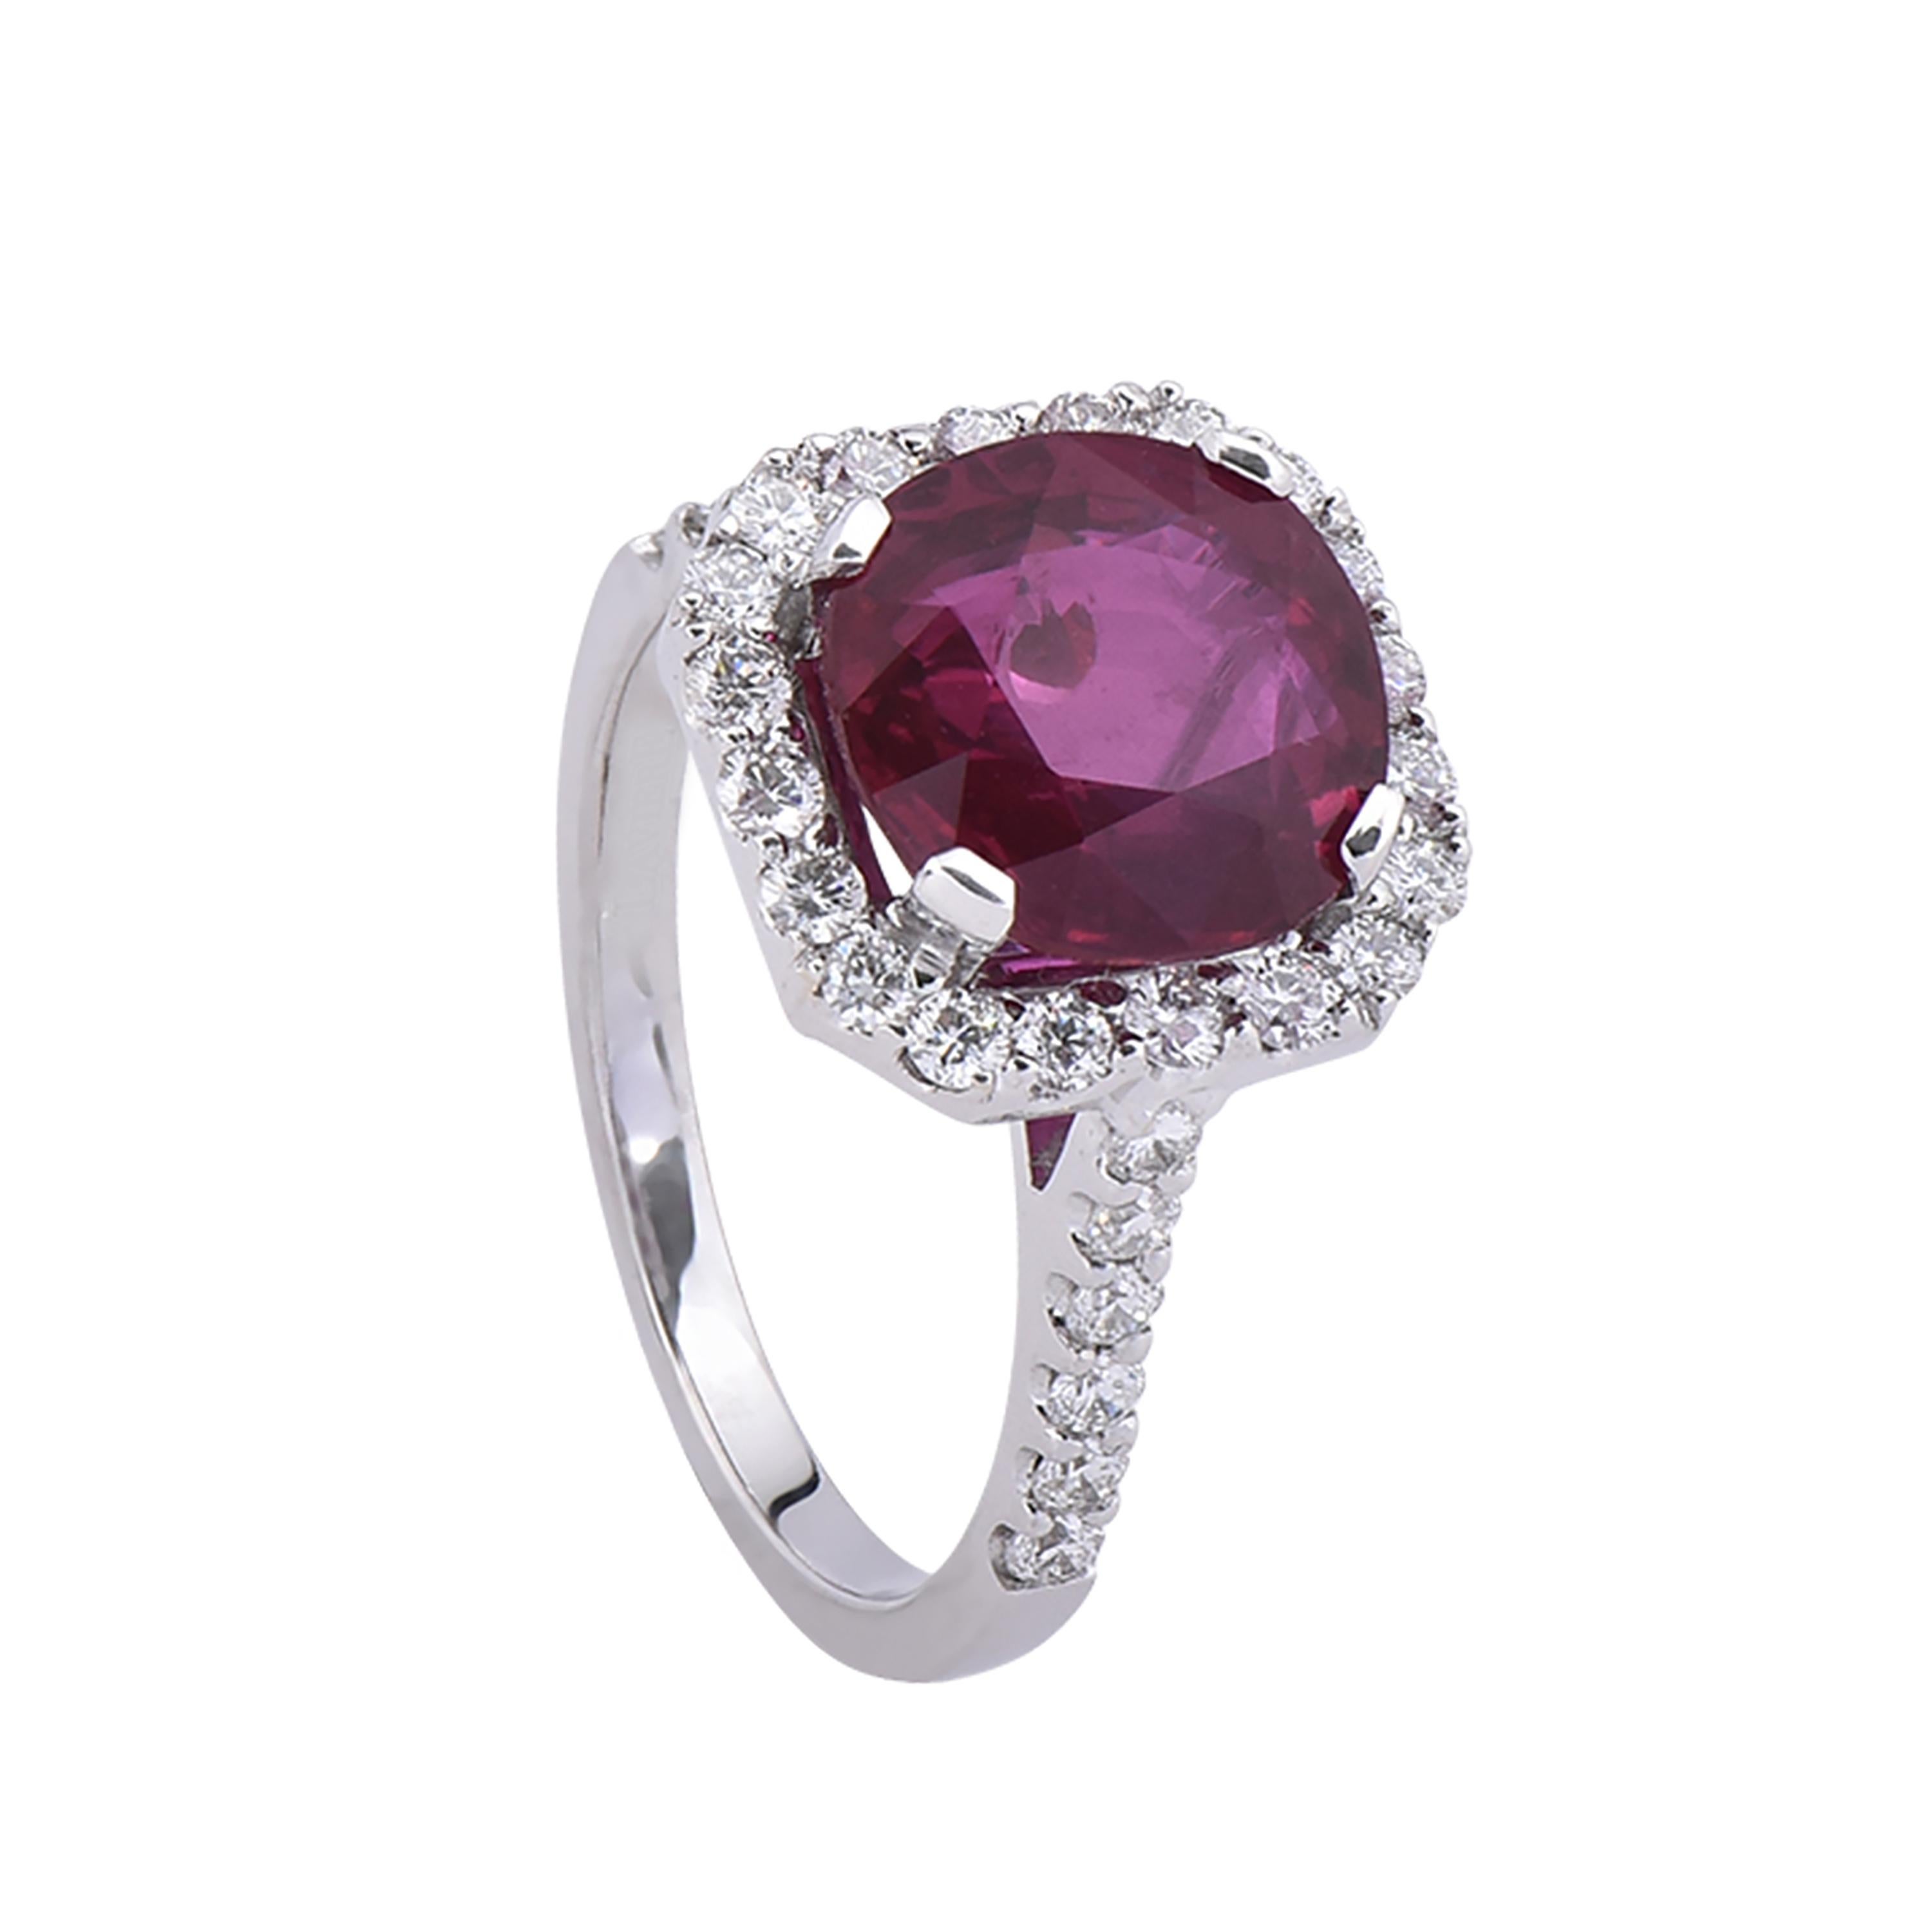 18 karat white gold ruby cocktail ring from the Scarlet collection of Laviere. The ring is set with a GRS certified 4.02 carats ruby and 0.64 carats round brilliant diamonds. 
Gold Weight 4.95 grams. Diamond Clarity VS-SI. Diamond Colour F-G.
Ring